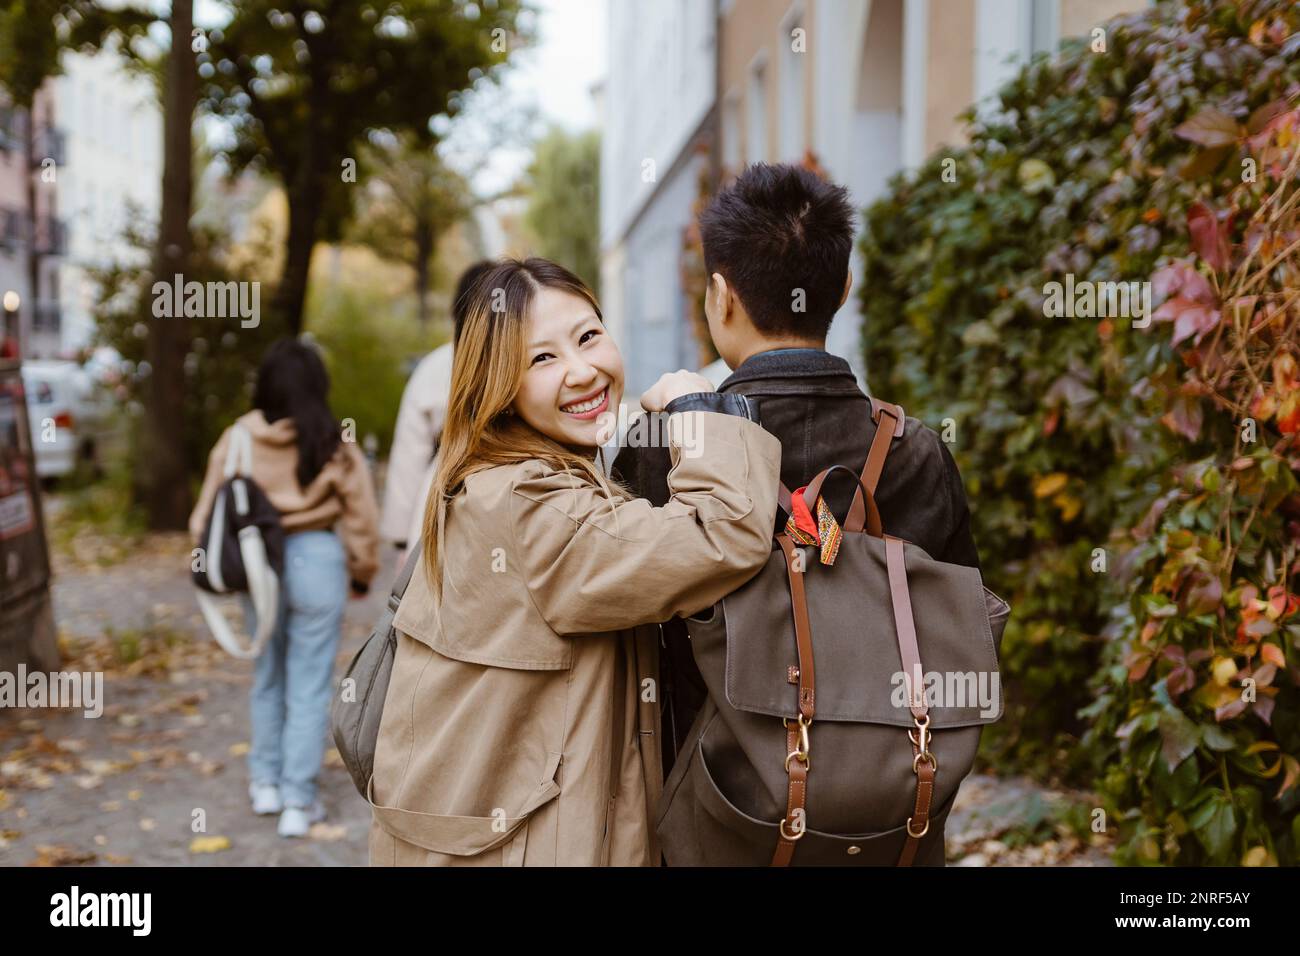 Portrait of happy woman looking over shoulder while walking with male friend on sidewalk Stock Photo